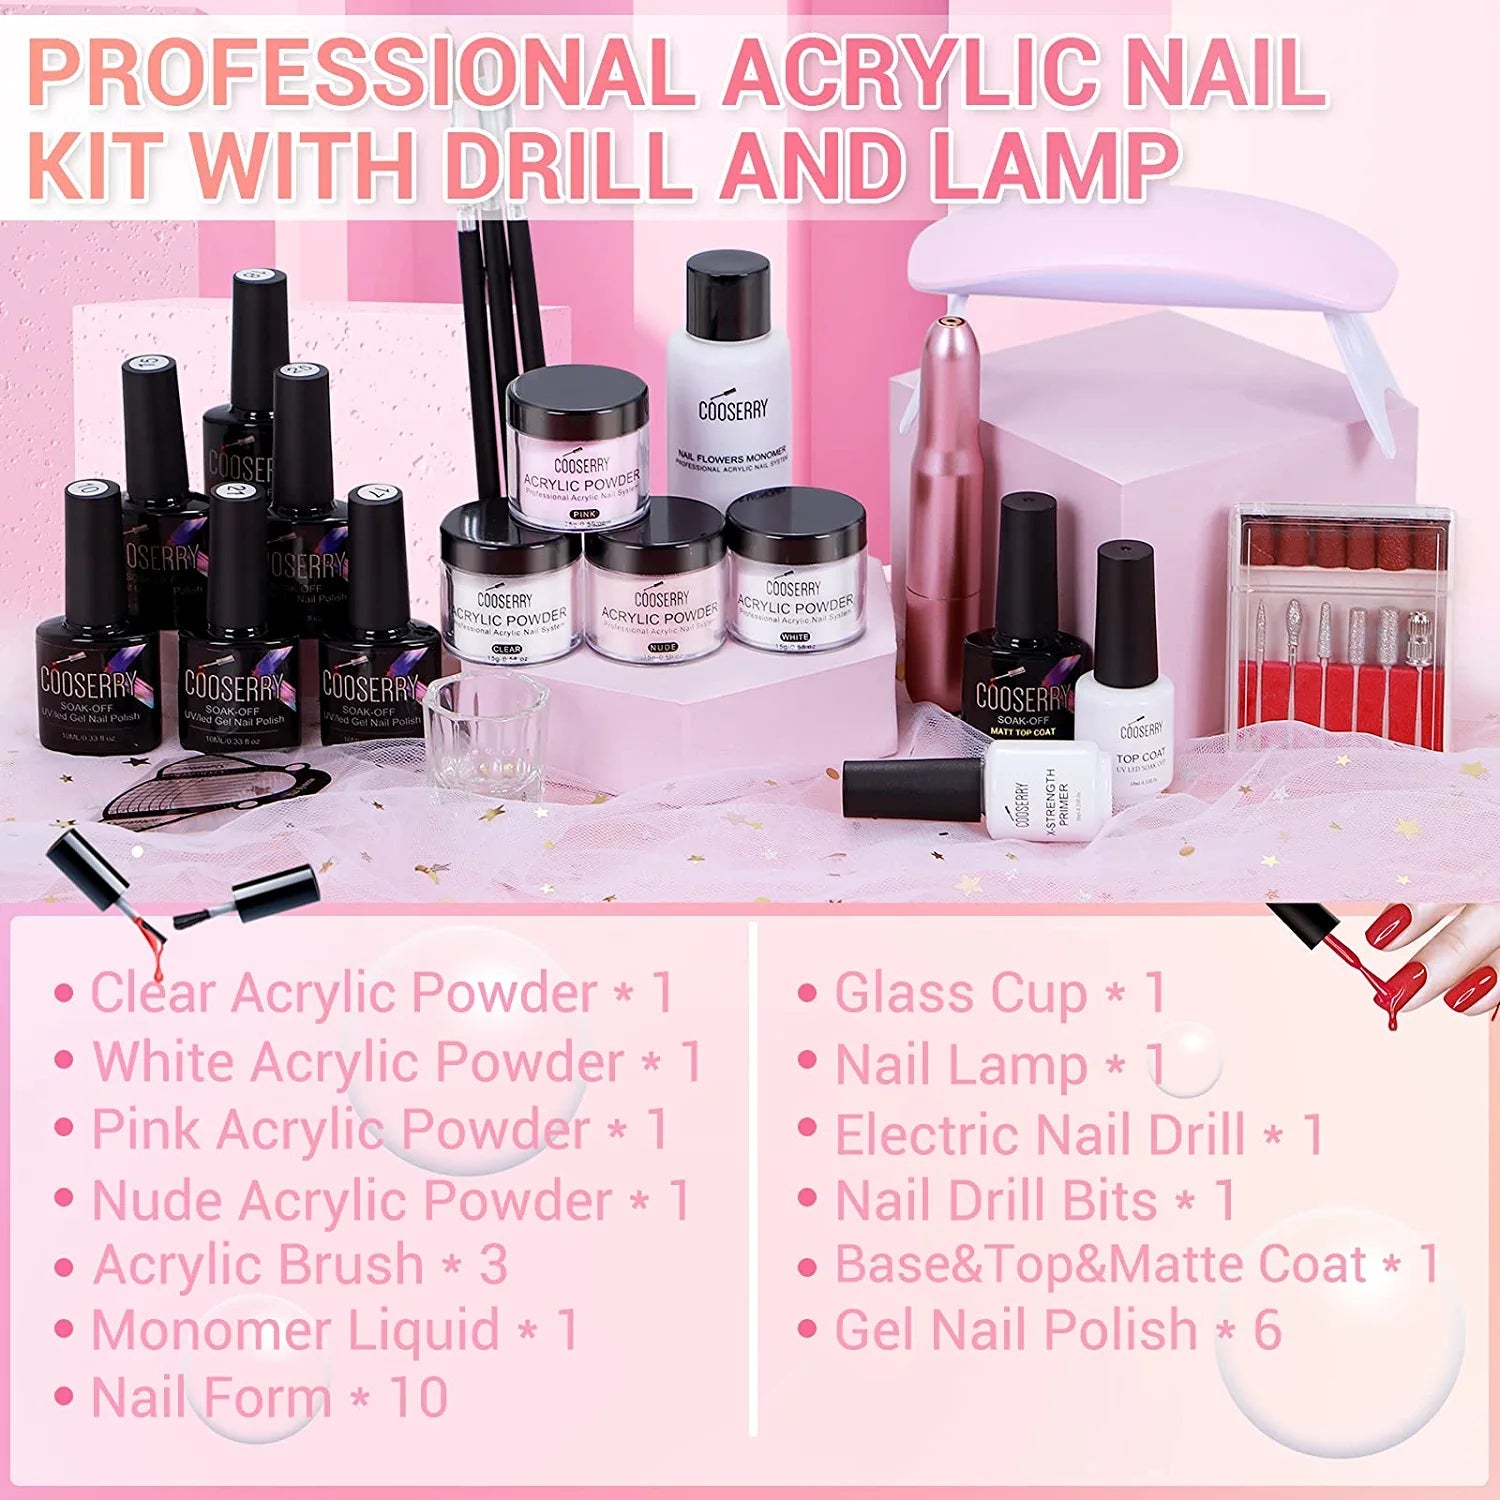 Acrylic Nail kit - Acrylic Powder Set Nails Kit Acrylic Set for Beginners Nail  Extension Carving with Acrylic Nail Brush with 3 Colours Pink Nude Pink  Beige Nail Powder kit 1